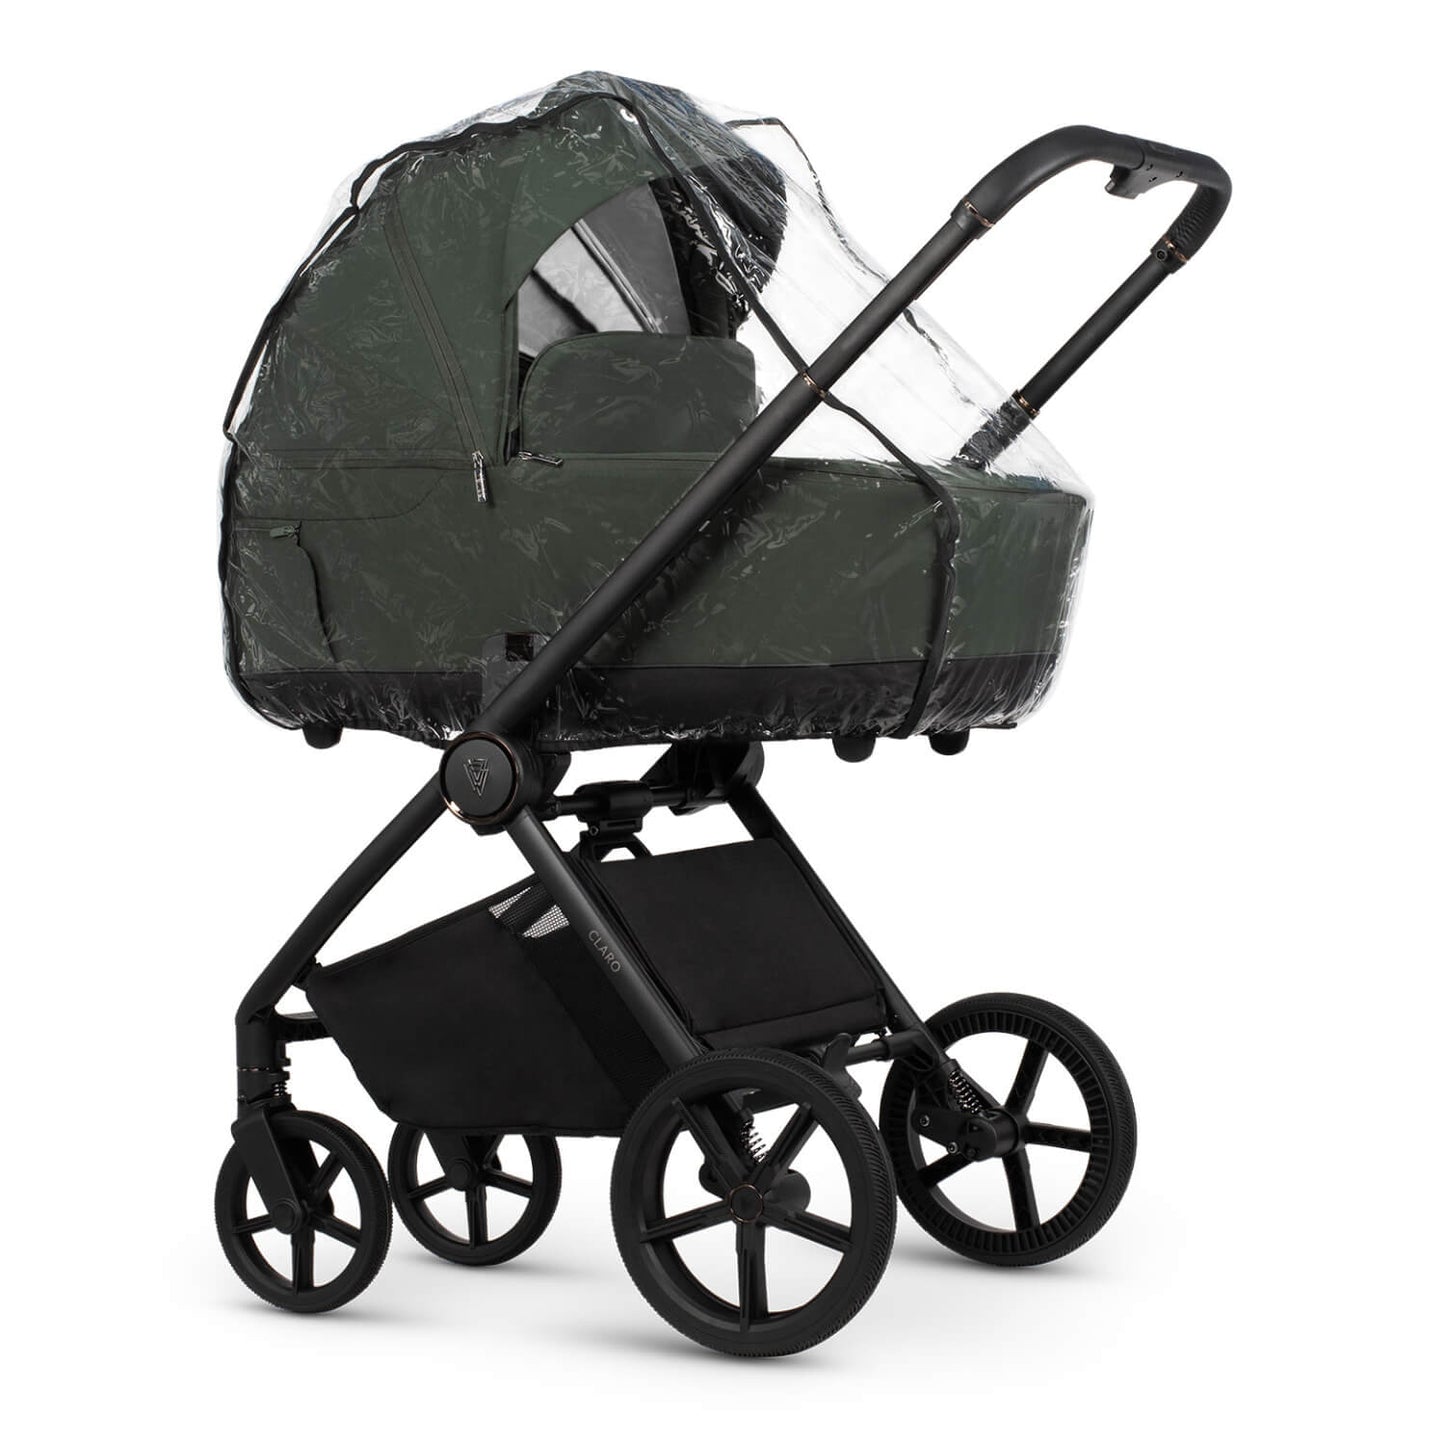 Venicci Claro Pram in Forest colour with the included clear rain cover attached